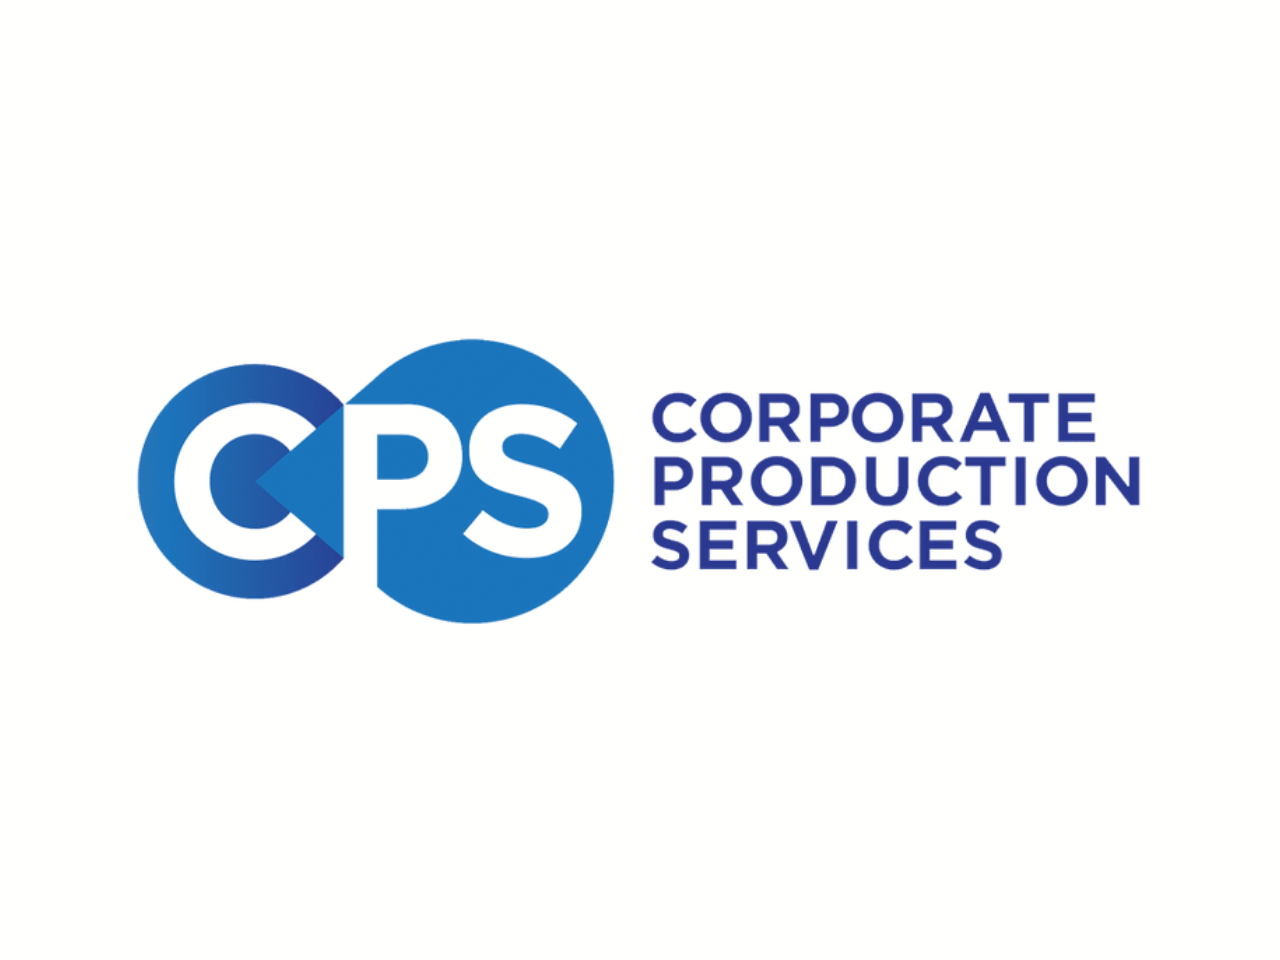 Corporate Production Services